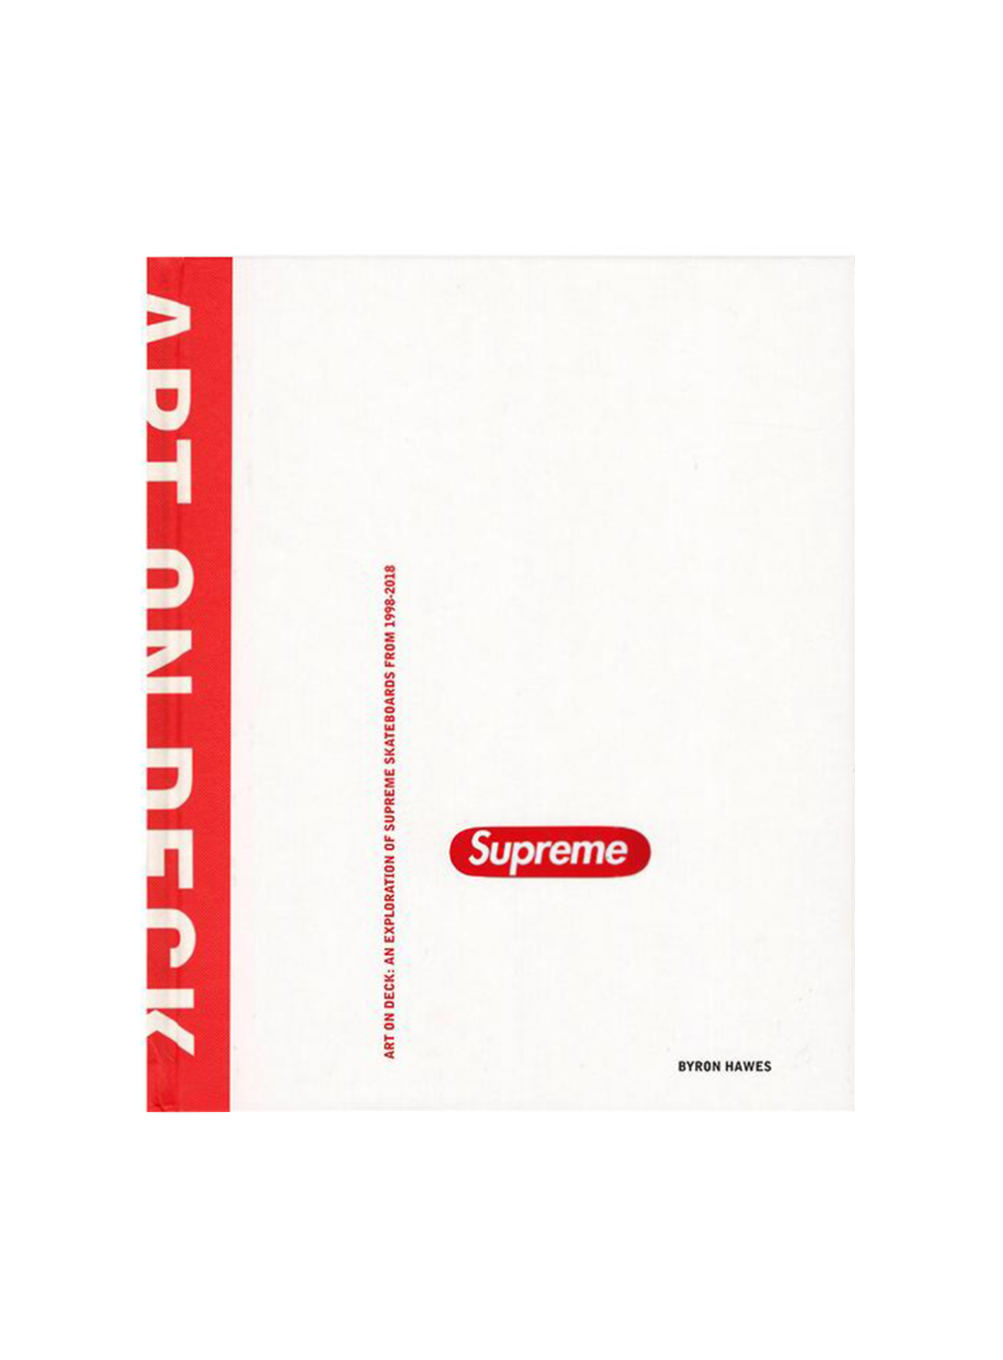 (-15%) Art on Deck: An Exploration of Supreme Skateboards from 1998-2018